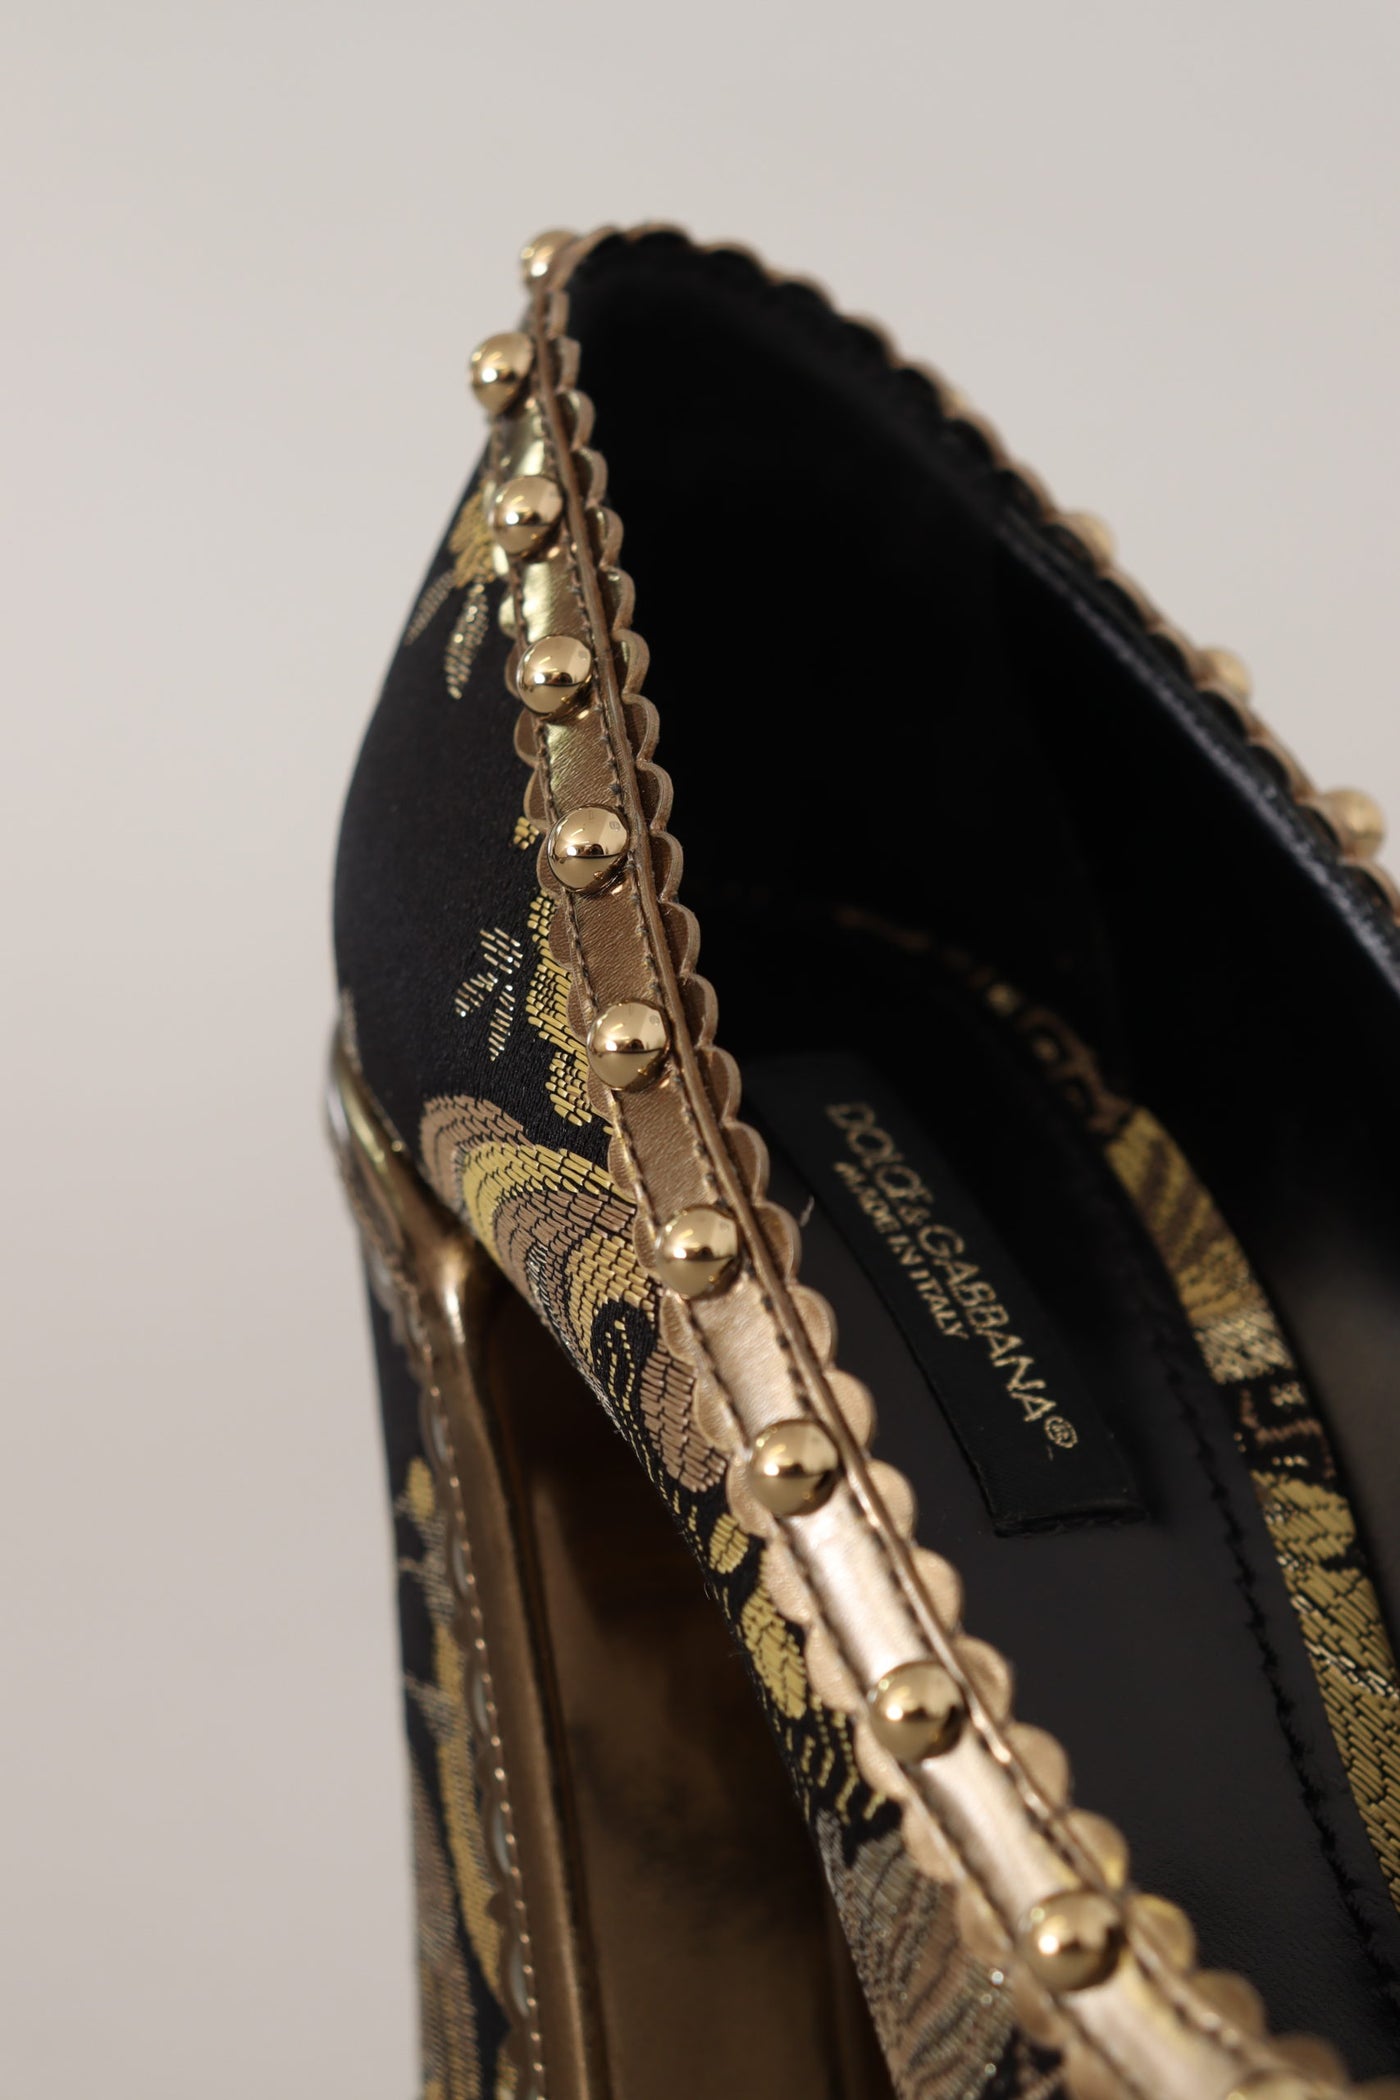 Dolce & Gabbana Gold Crystal Square Toe Brocade Pumps Shoes